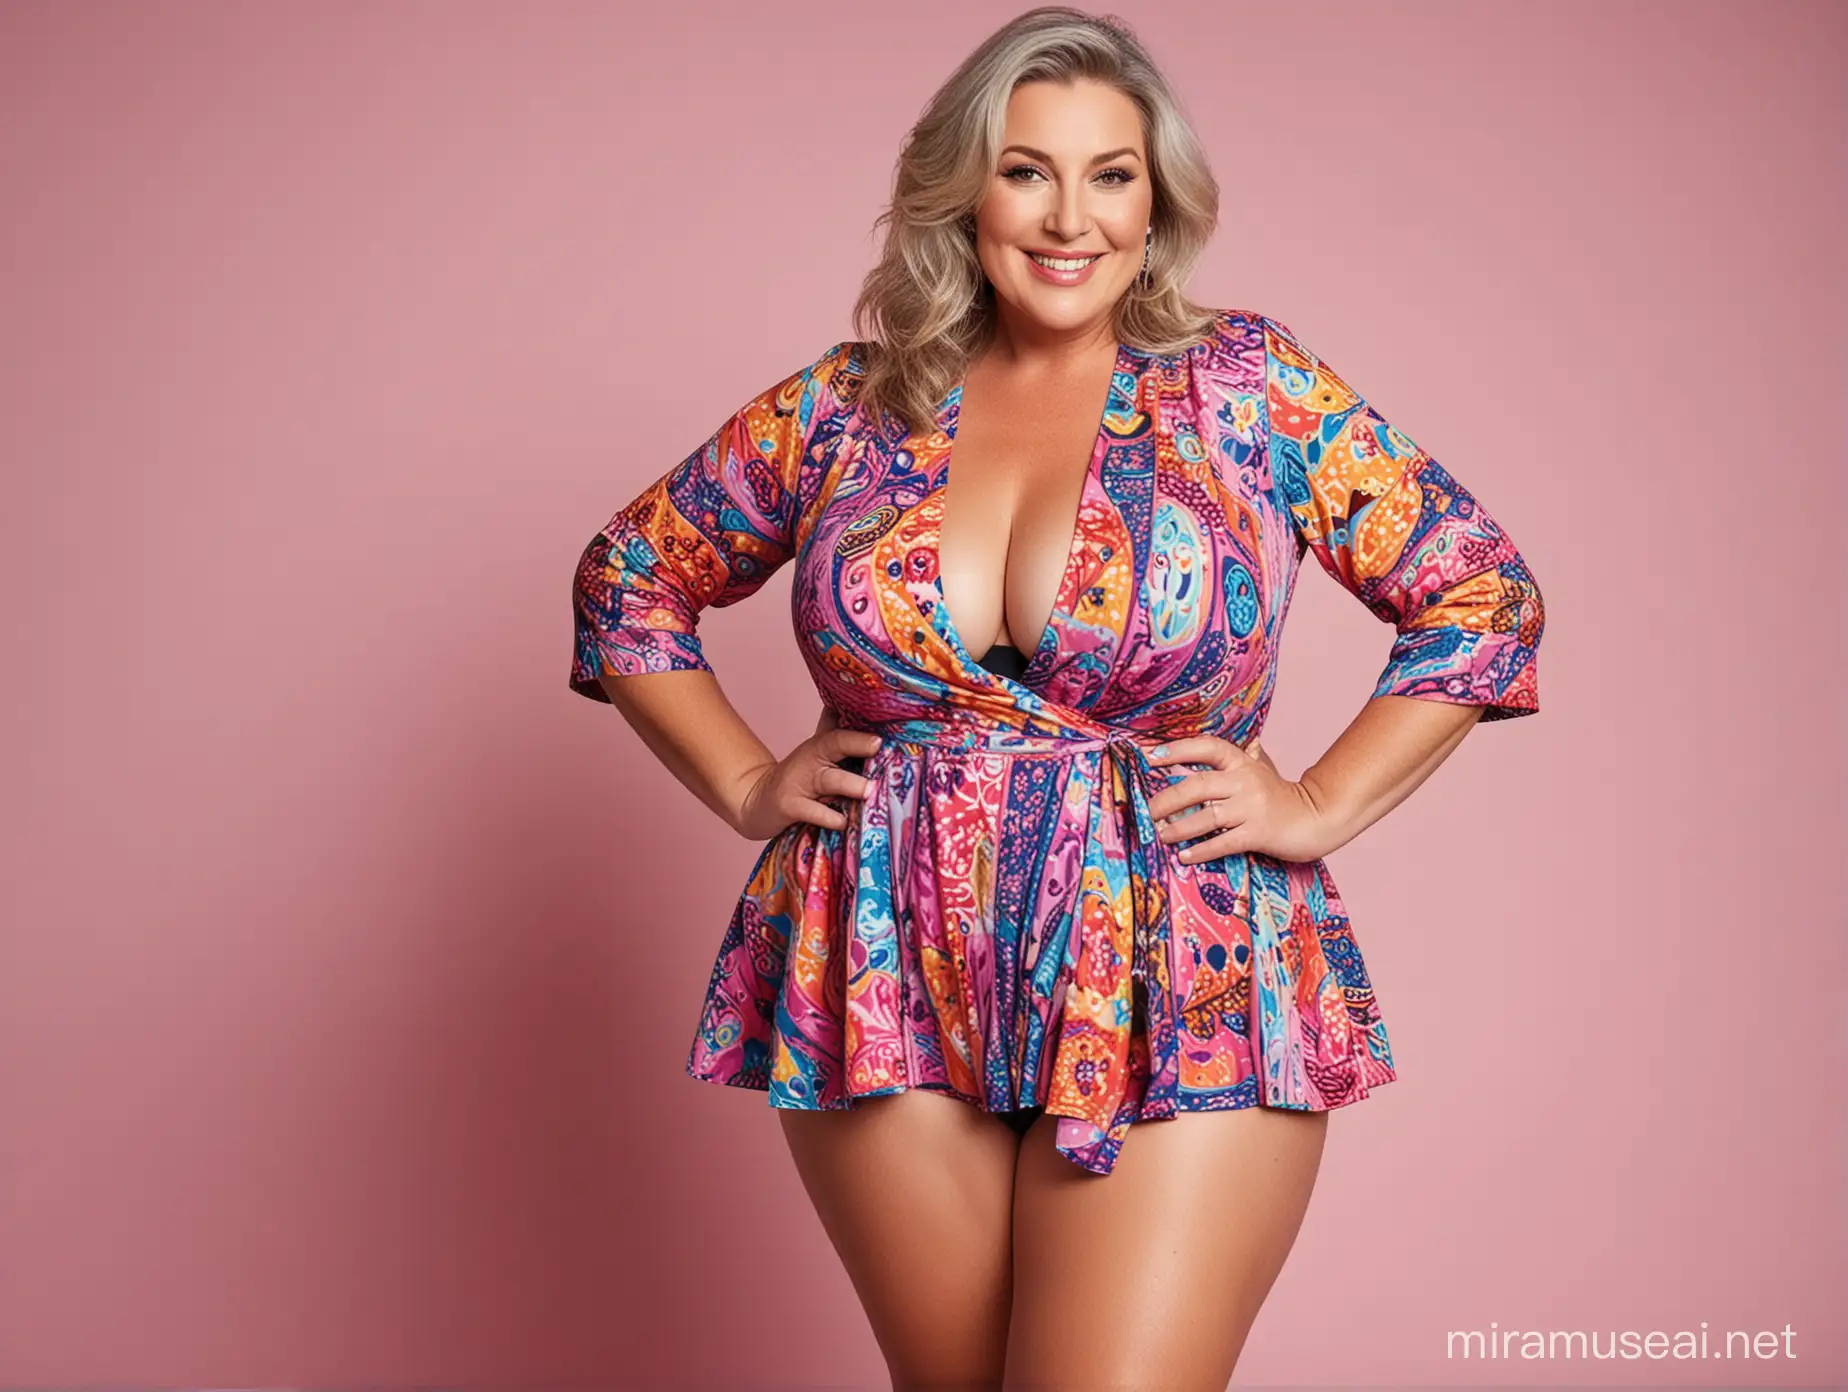 Plus size women aged 50, wearing colorful revealing clothes, beautiful, curvy.